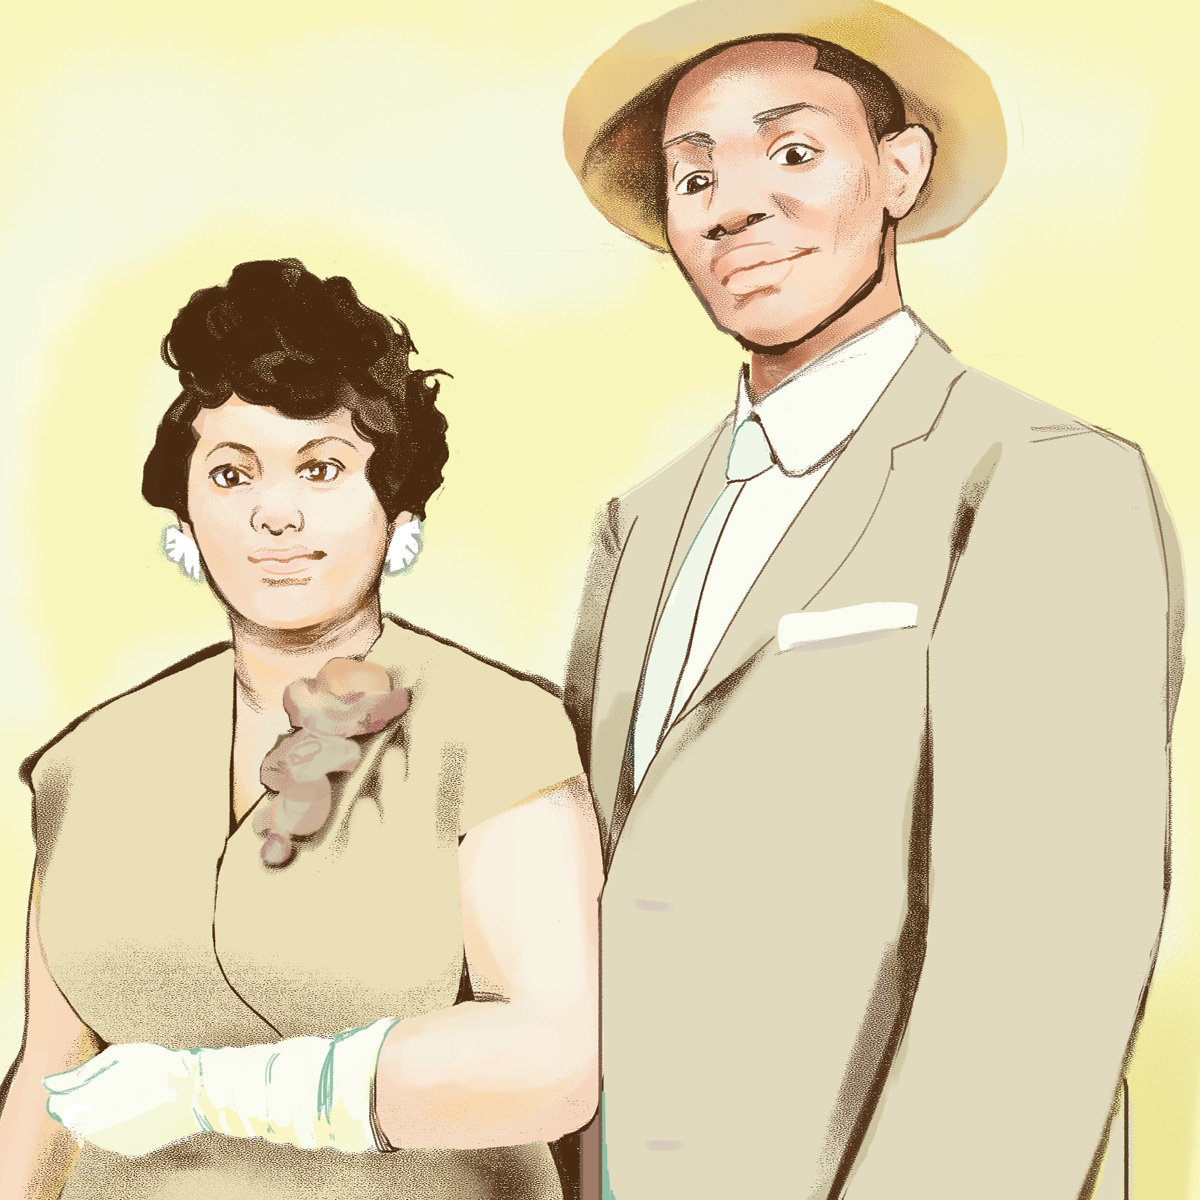 an illustration of a 1940s Black couple posing against a yellow background